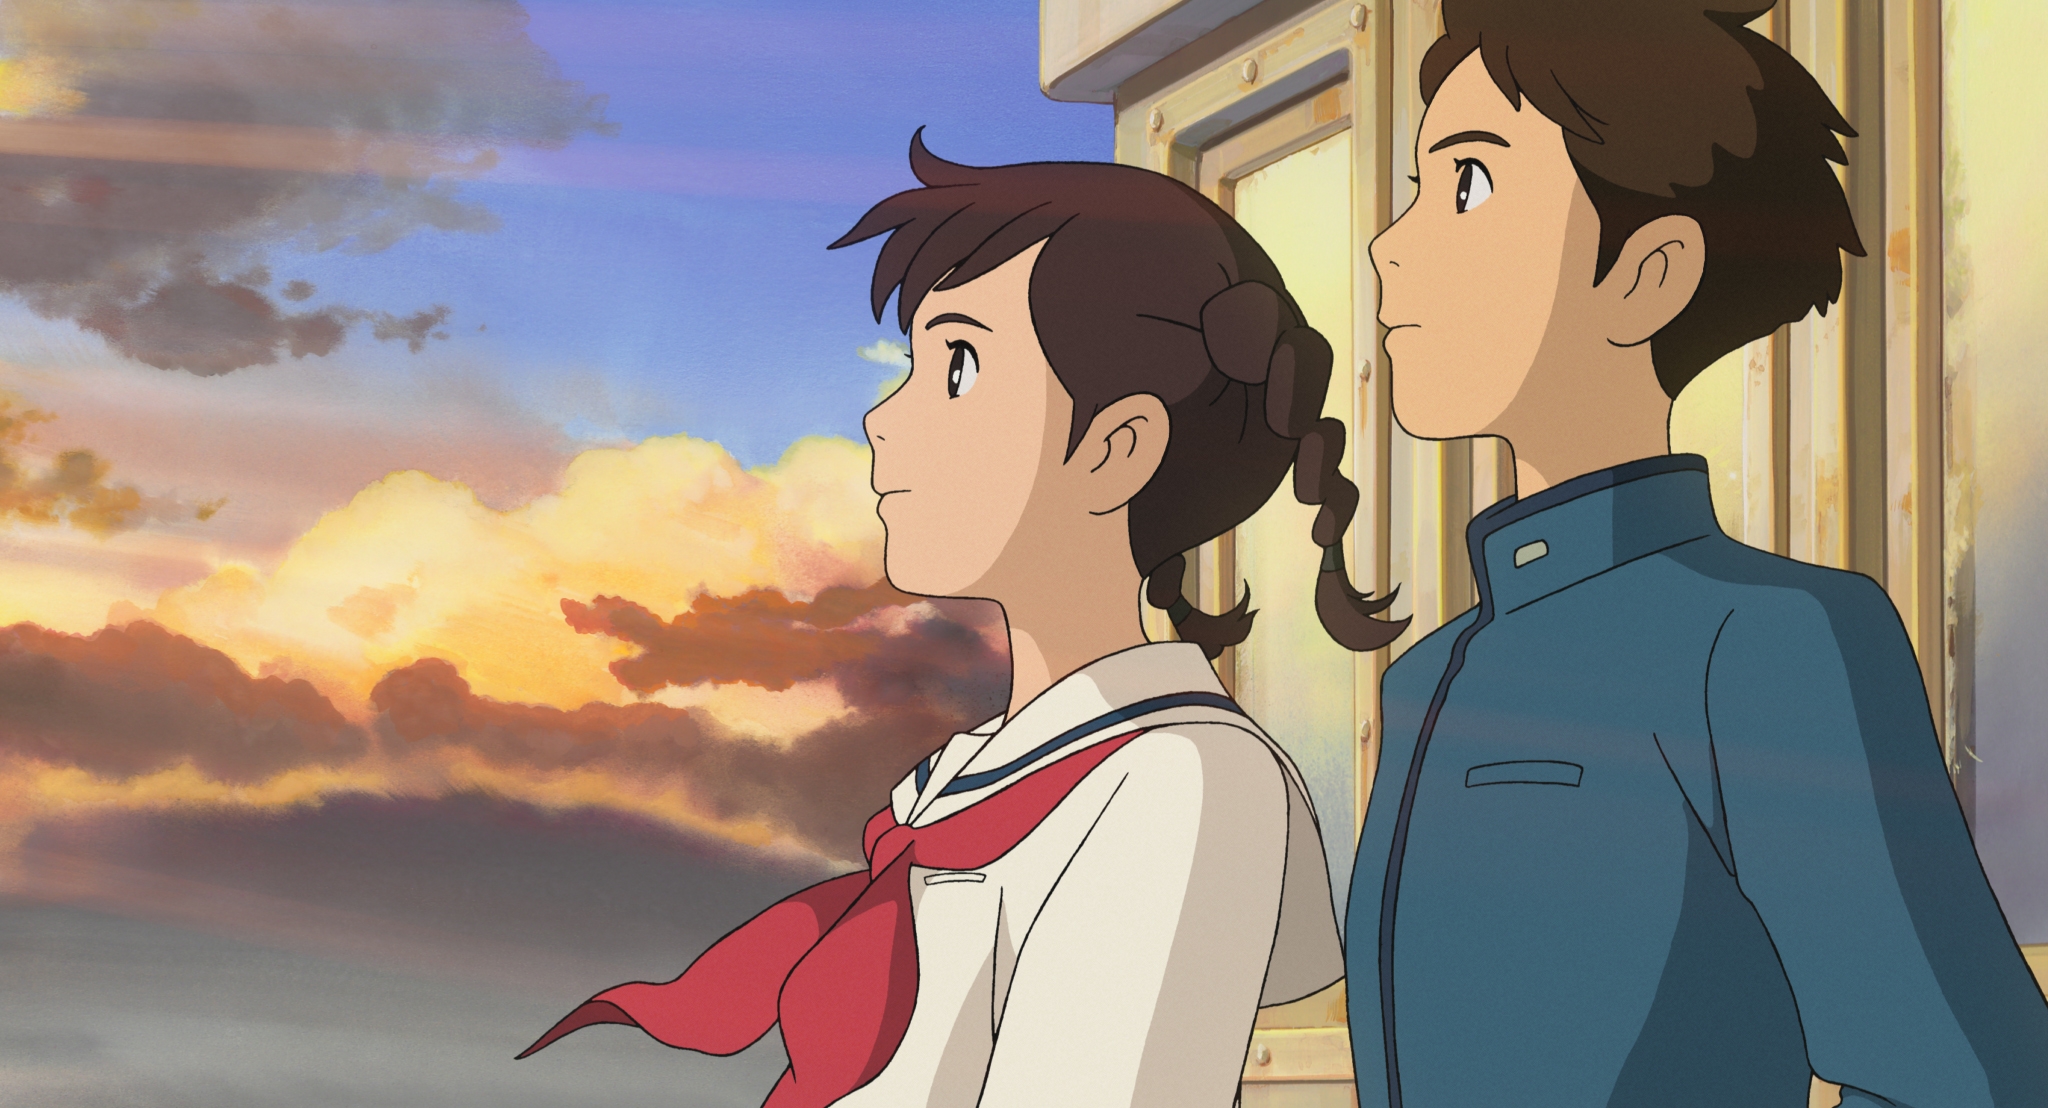 From Up On Poppy Hill Backgrounds, Compatible - PC, Mobile, Gadgets| 2048x1108 px